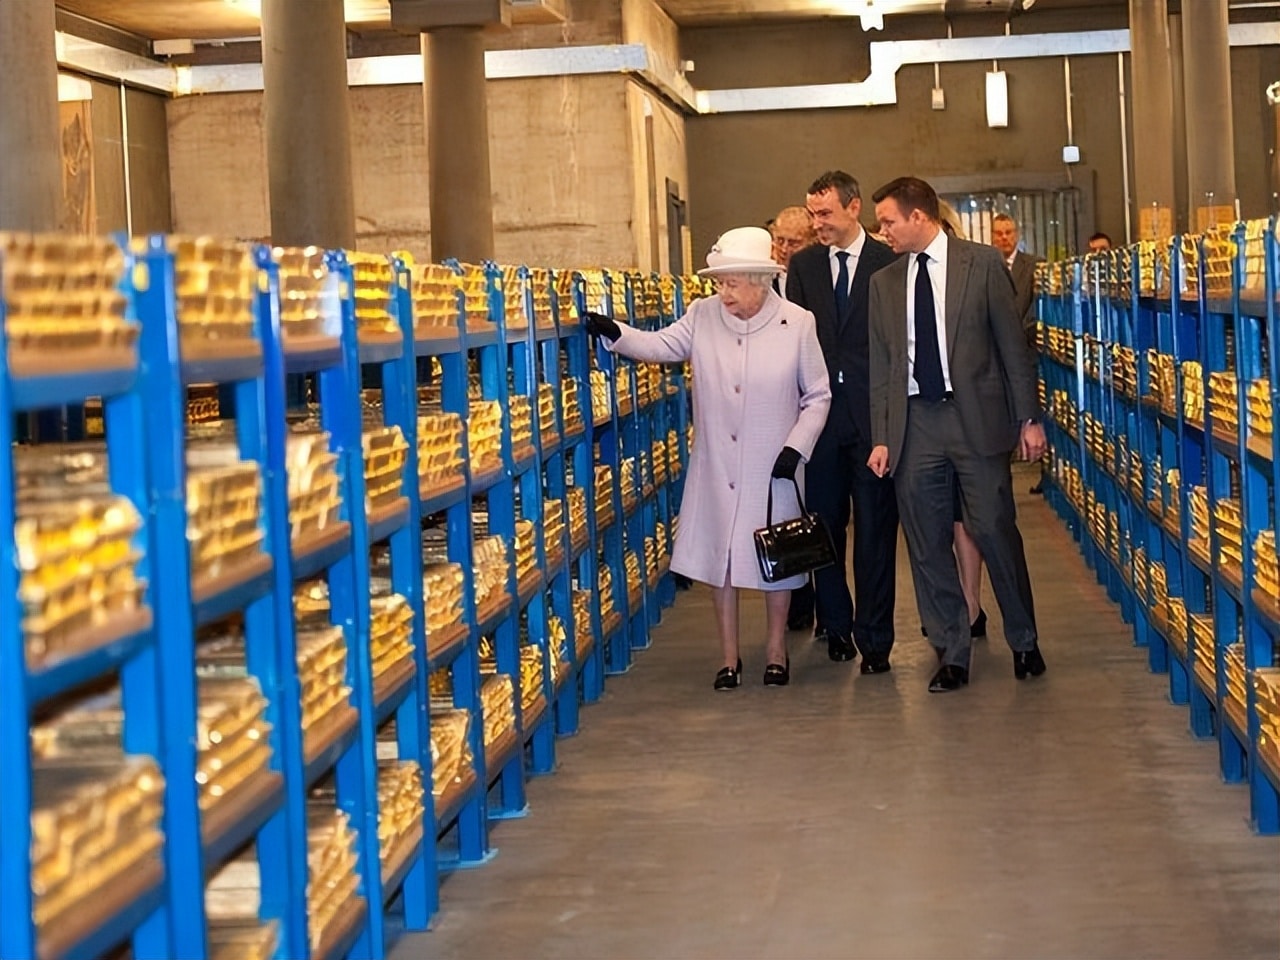 Queen Elizabeth II views stacks of gold during her visit to the Bank of England with Prince Philip, Duke of Edinburgh, on December 13, 2012, in London, England. Photo: Getty Images.